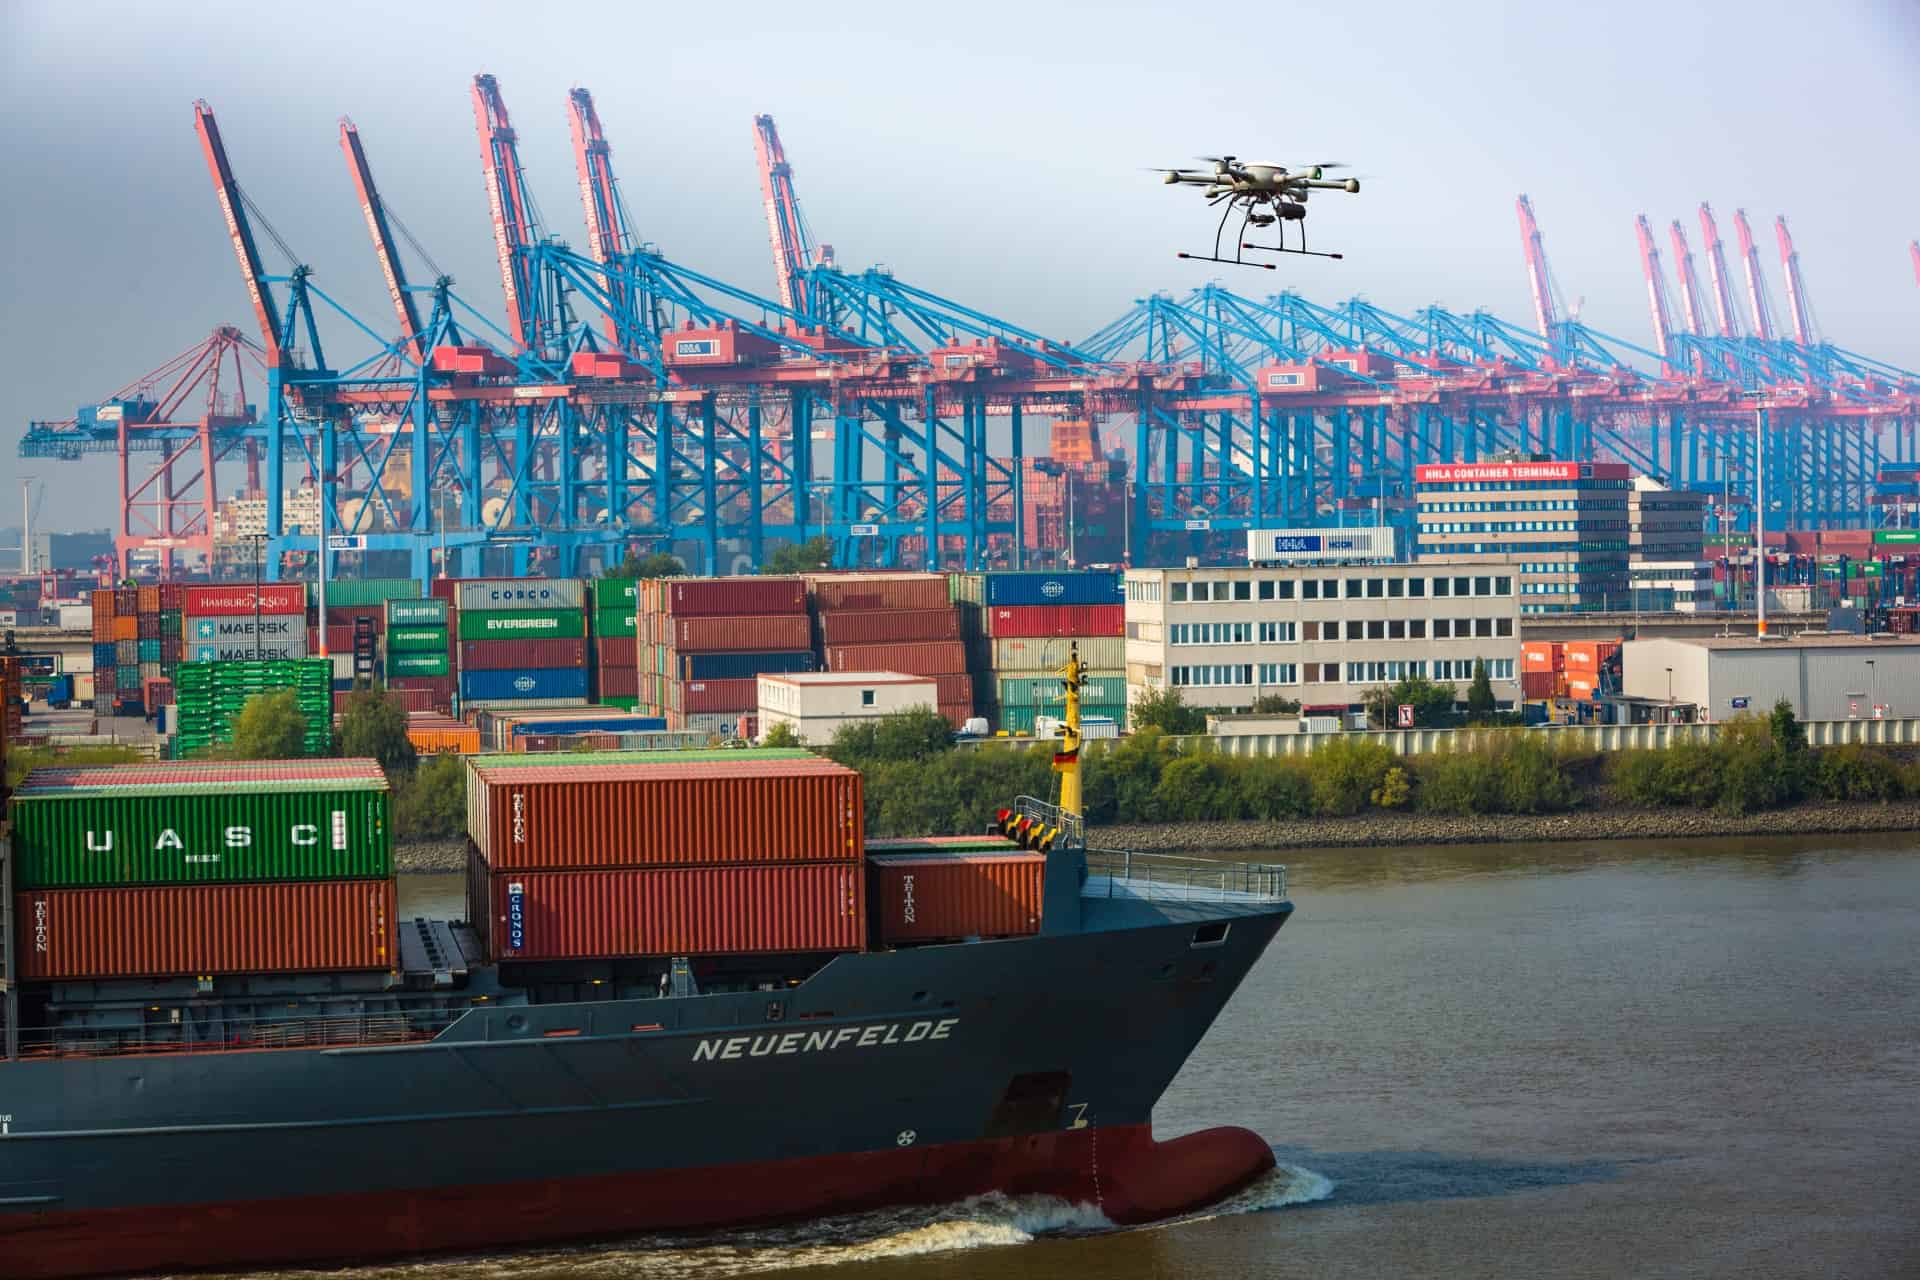 Multicopter Drone by HHLA Sky at Hamburg Harbor. Foto: Thorsten Indra